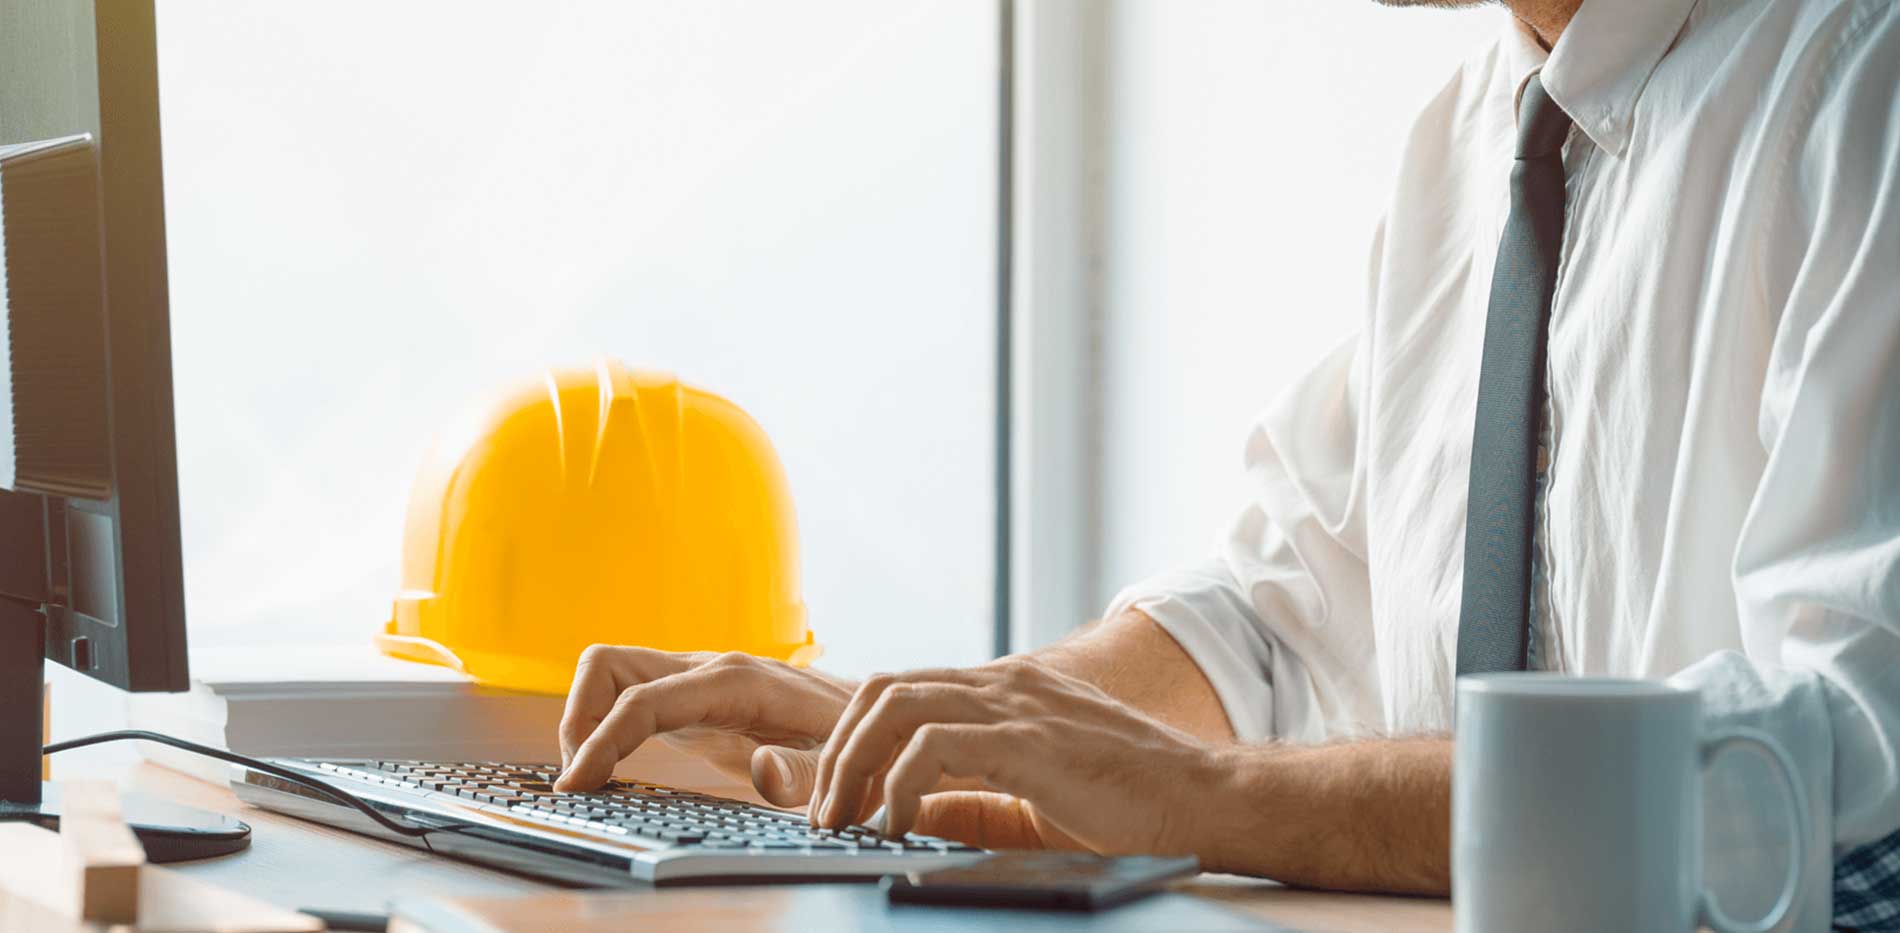 Man working at desk with hard hat next to him